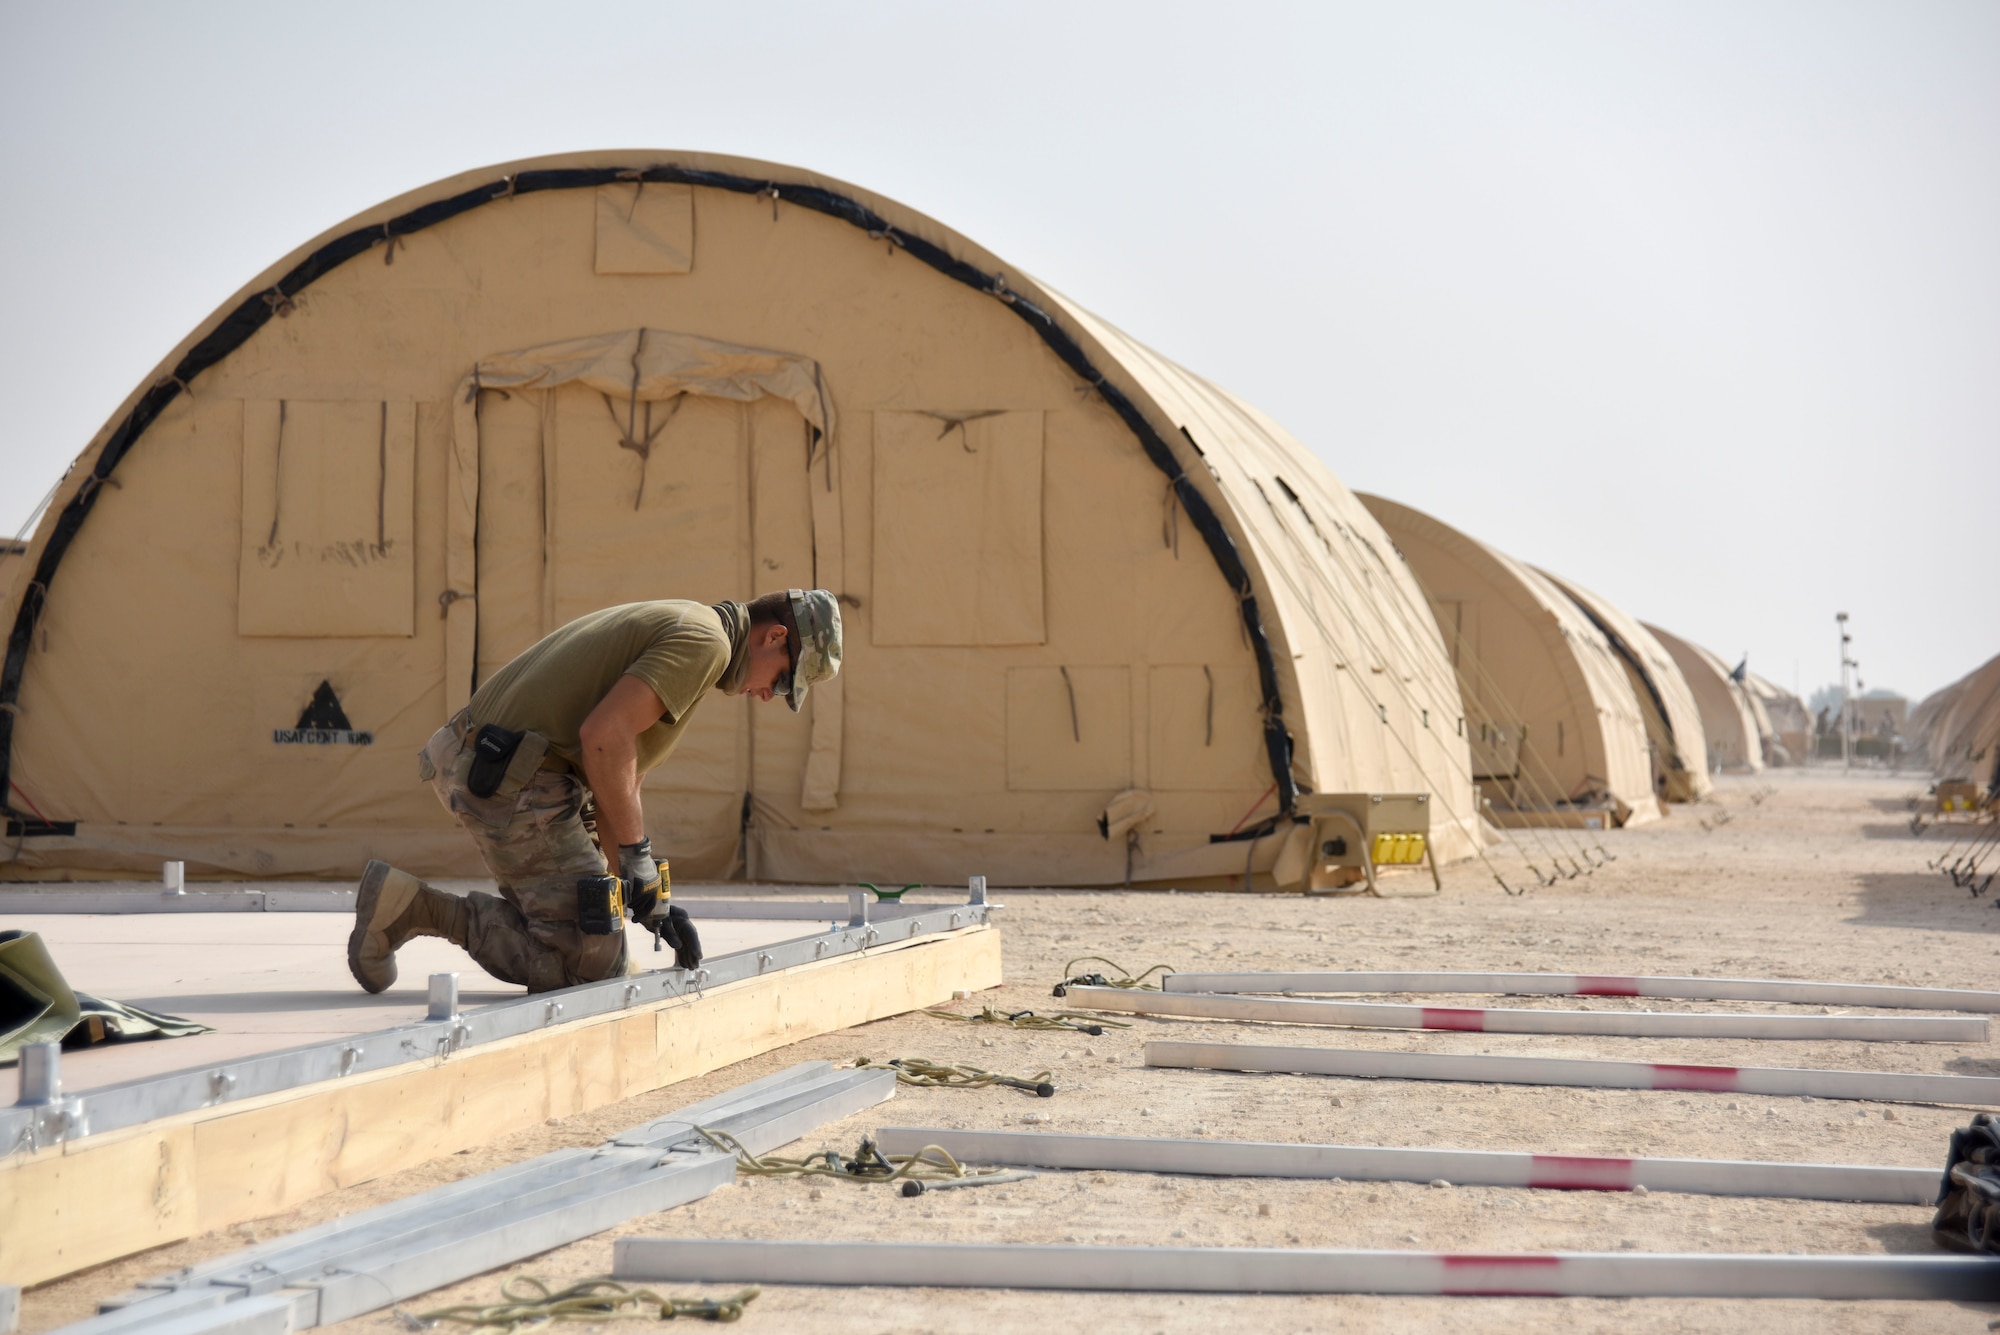 The significant infrastructure improvements made by civil engineering Airmen at PSAB enable U.S. Air Forces Central Command and U.S. Central Command to assure and enhance the defense of Saudi Arabia and security of the Middle East region.